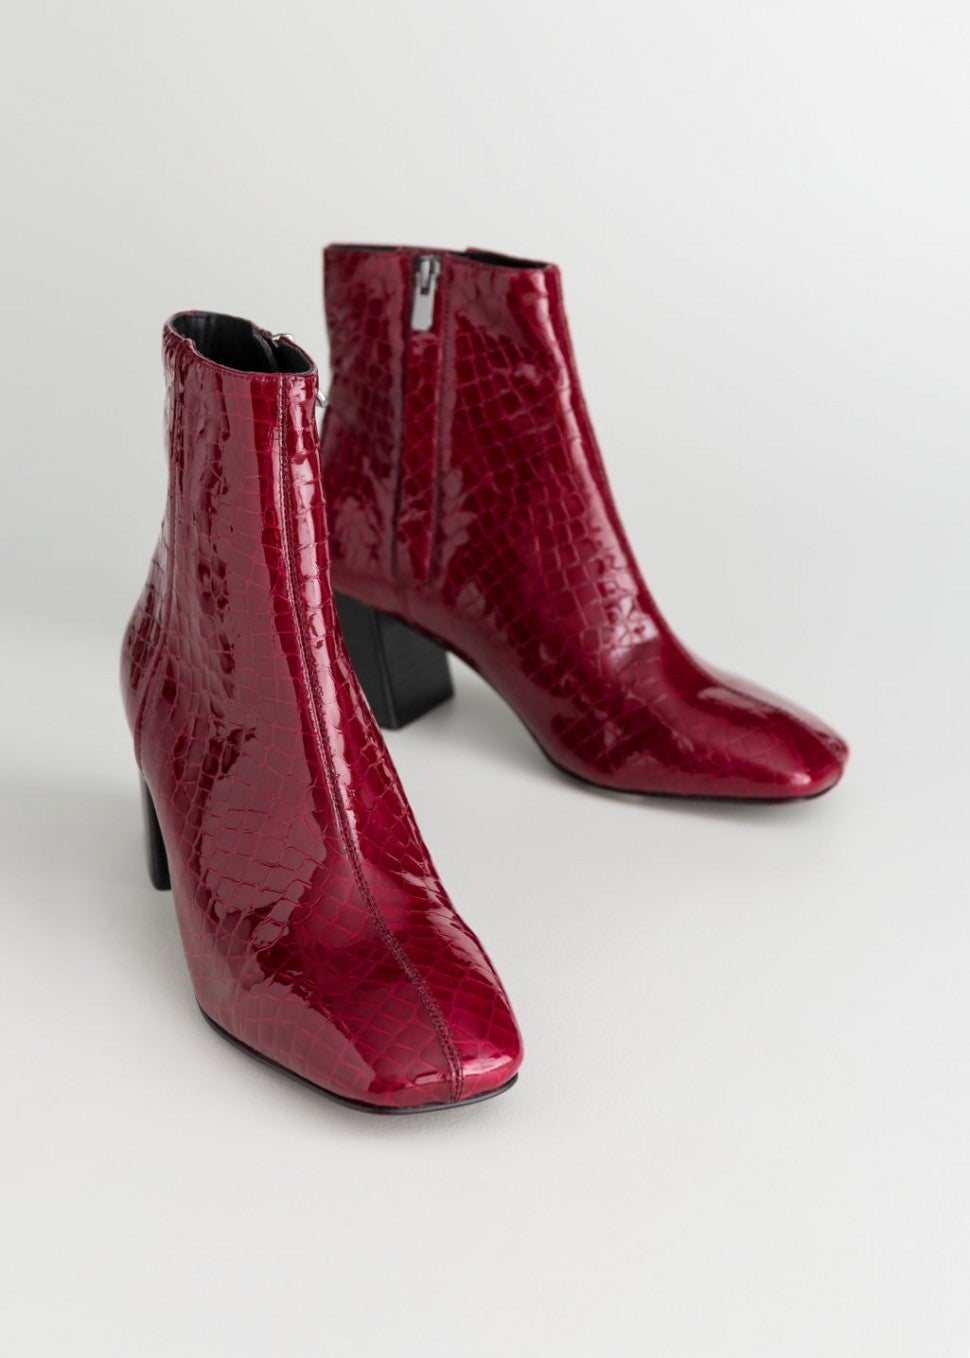 & Other Stories square toe boots